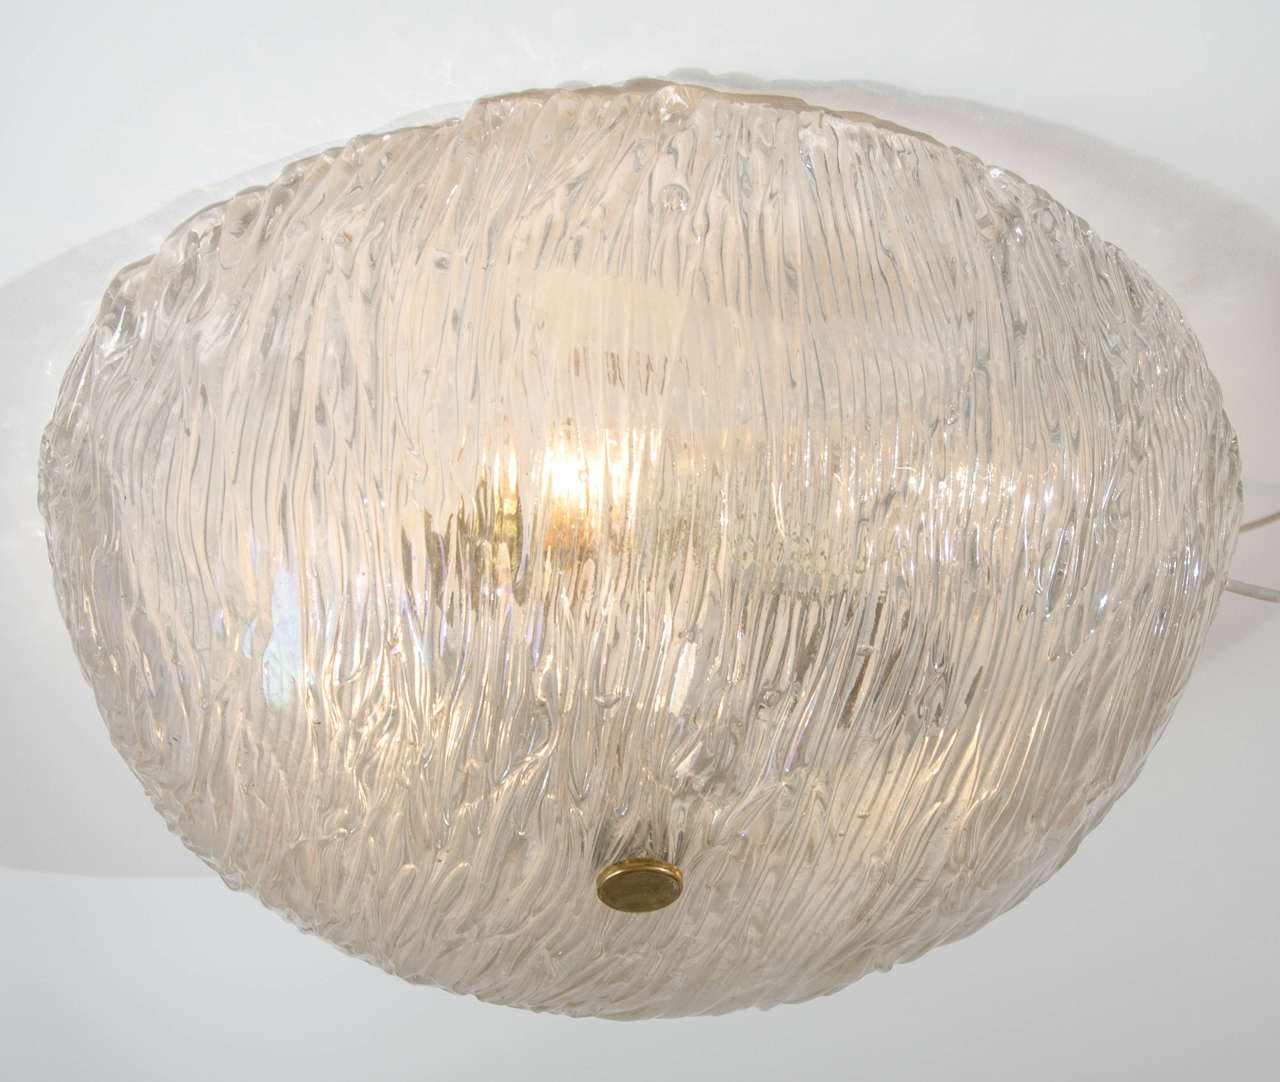 Hemisphere shaped glass dome with strings of layered tube glass sitting next to each other create a diffused light. The clear glass has iridescent surface color.